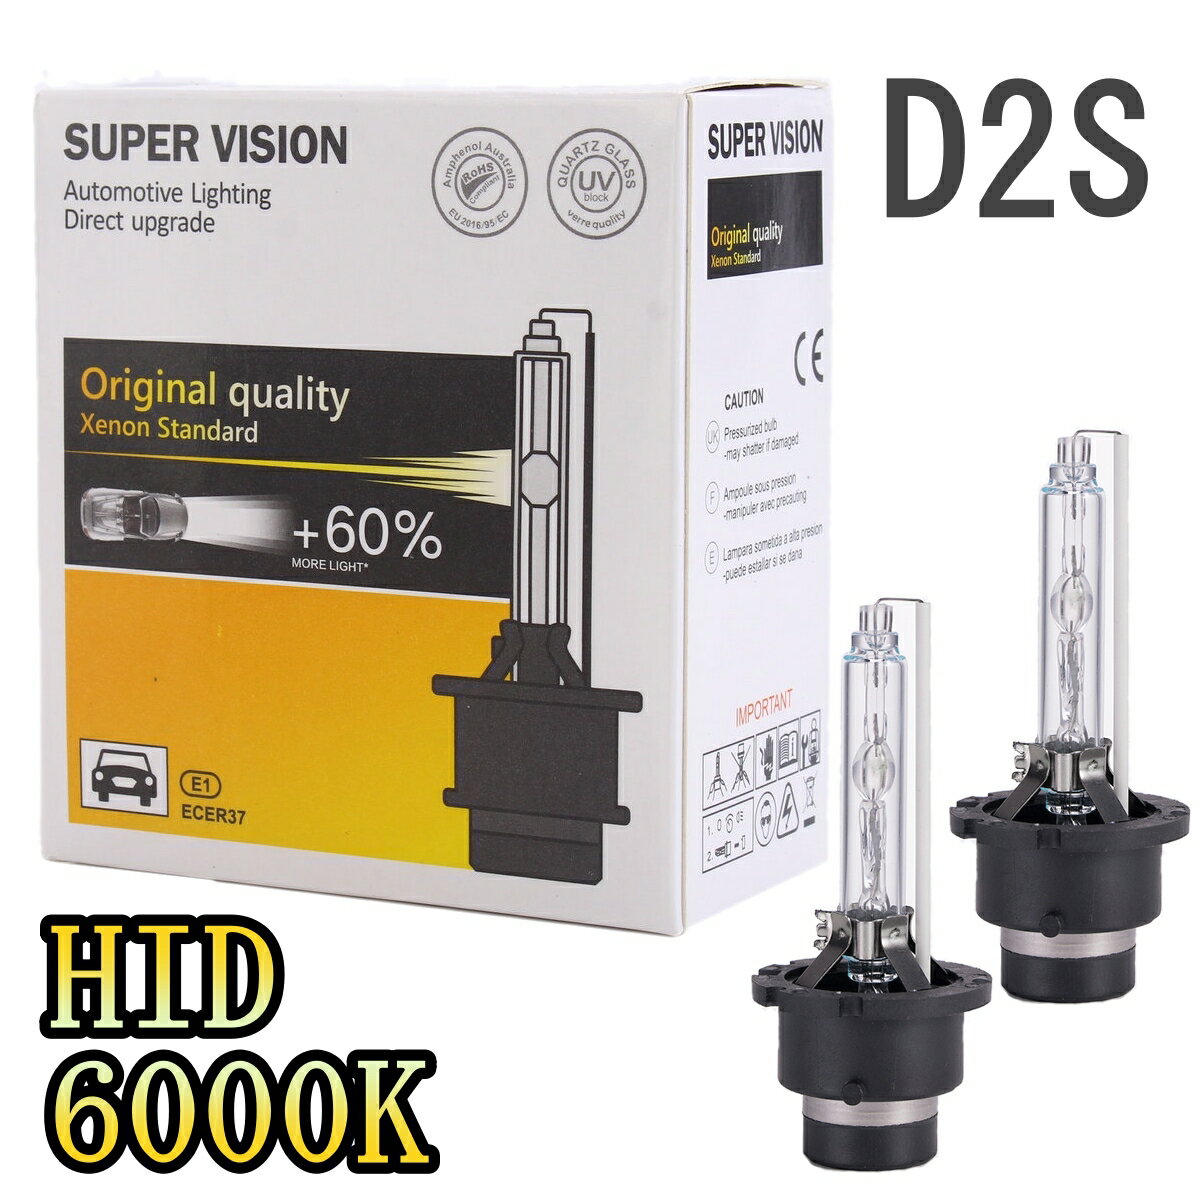 HID wbhCgou [r[ T[G{[V G{ CT9A LZm D2S G{7 GTA H14.2`H14.12 OH 6400lm